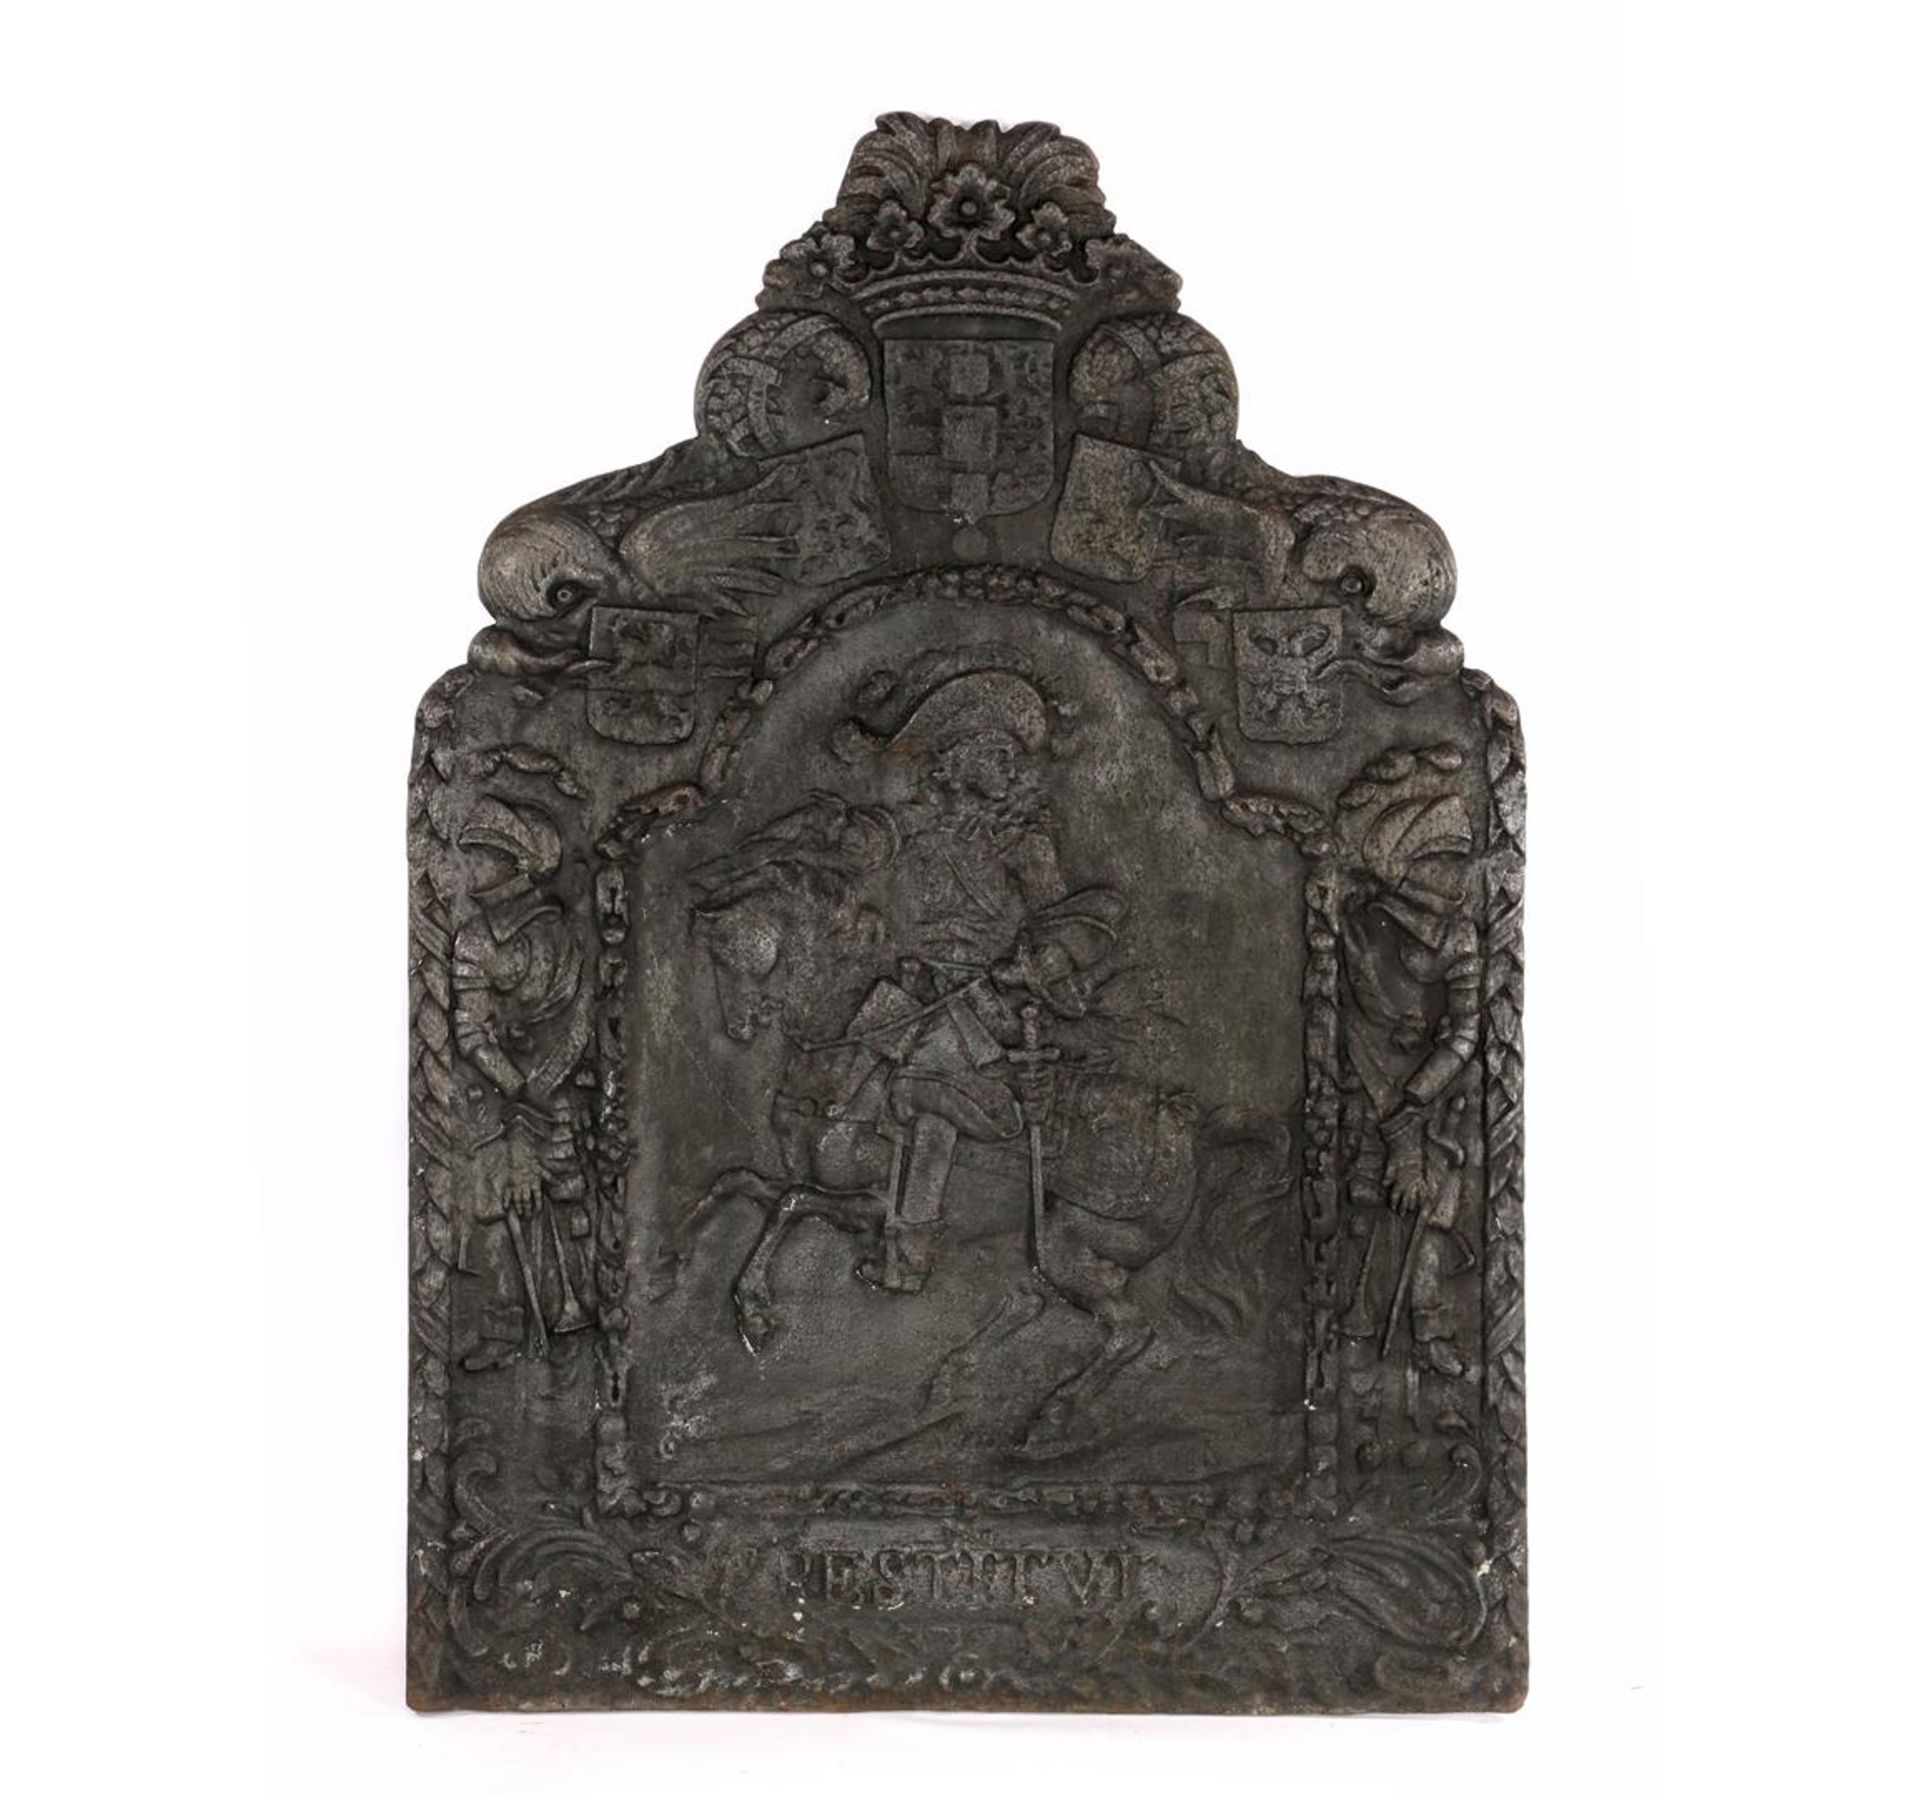 Antique fireback with a decoration of a rider